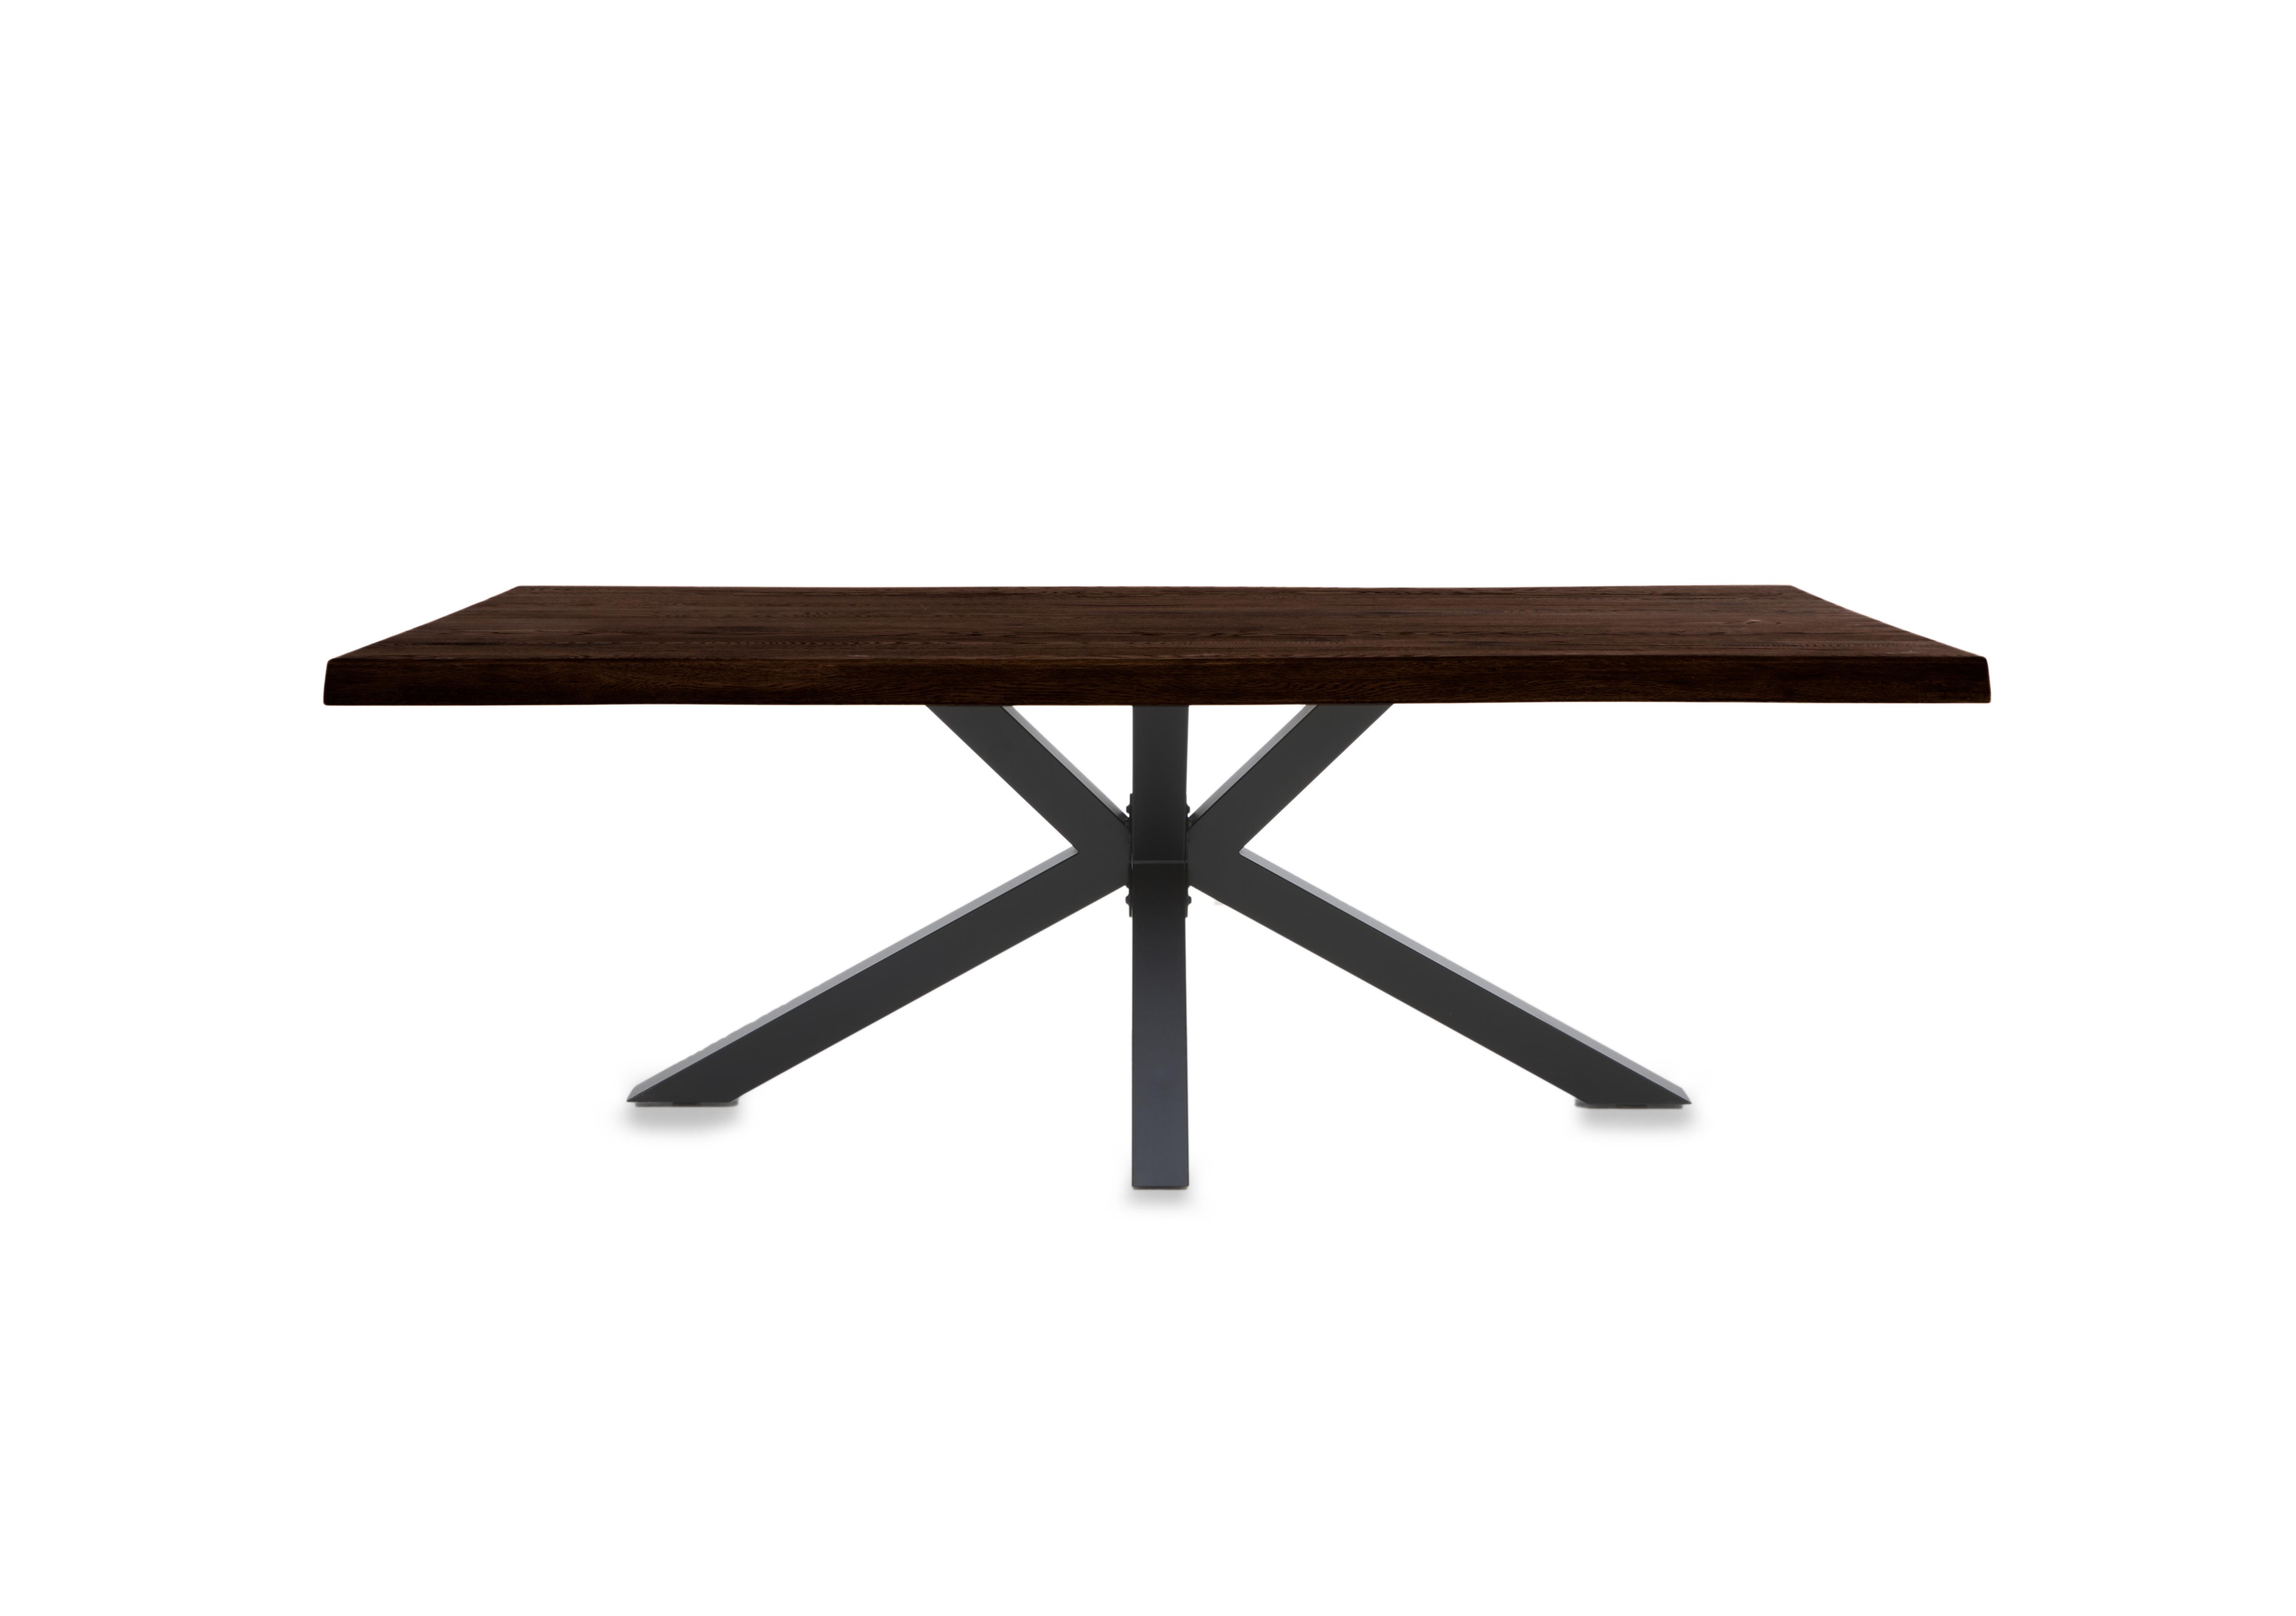 Njord Raw Edge Dining Table with Metal Star Base in Smoked on Furniture Village